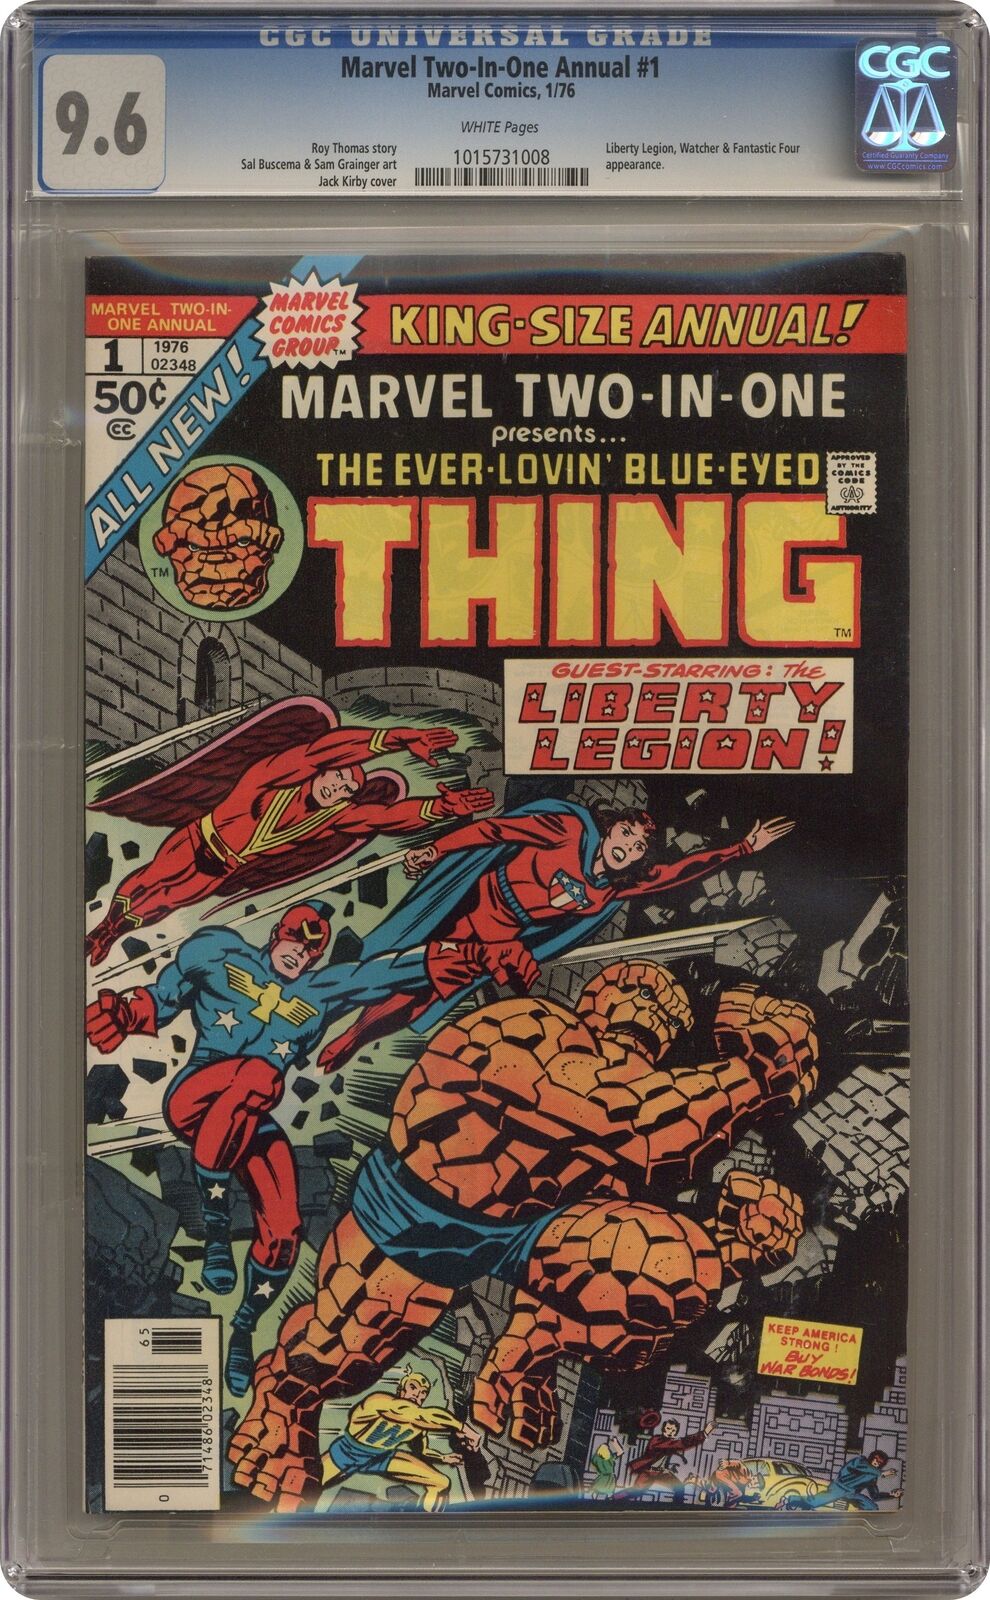 Marvel Two-in-One Annual #1 CGC 9.6 1976 1015731008